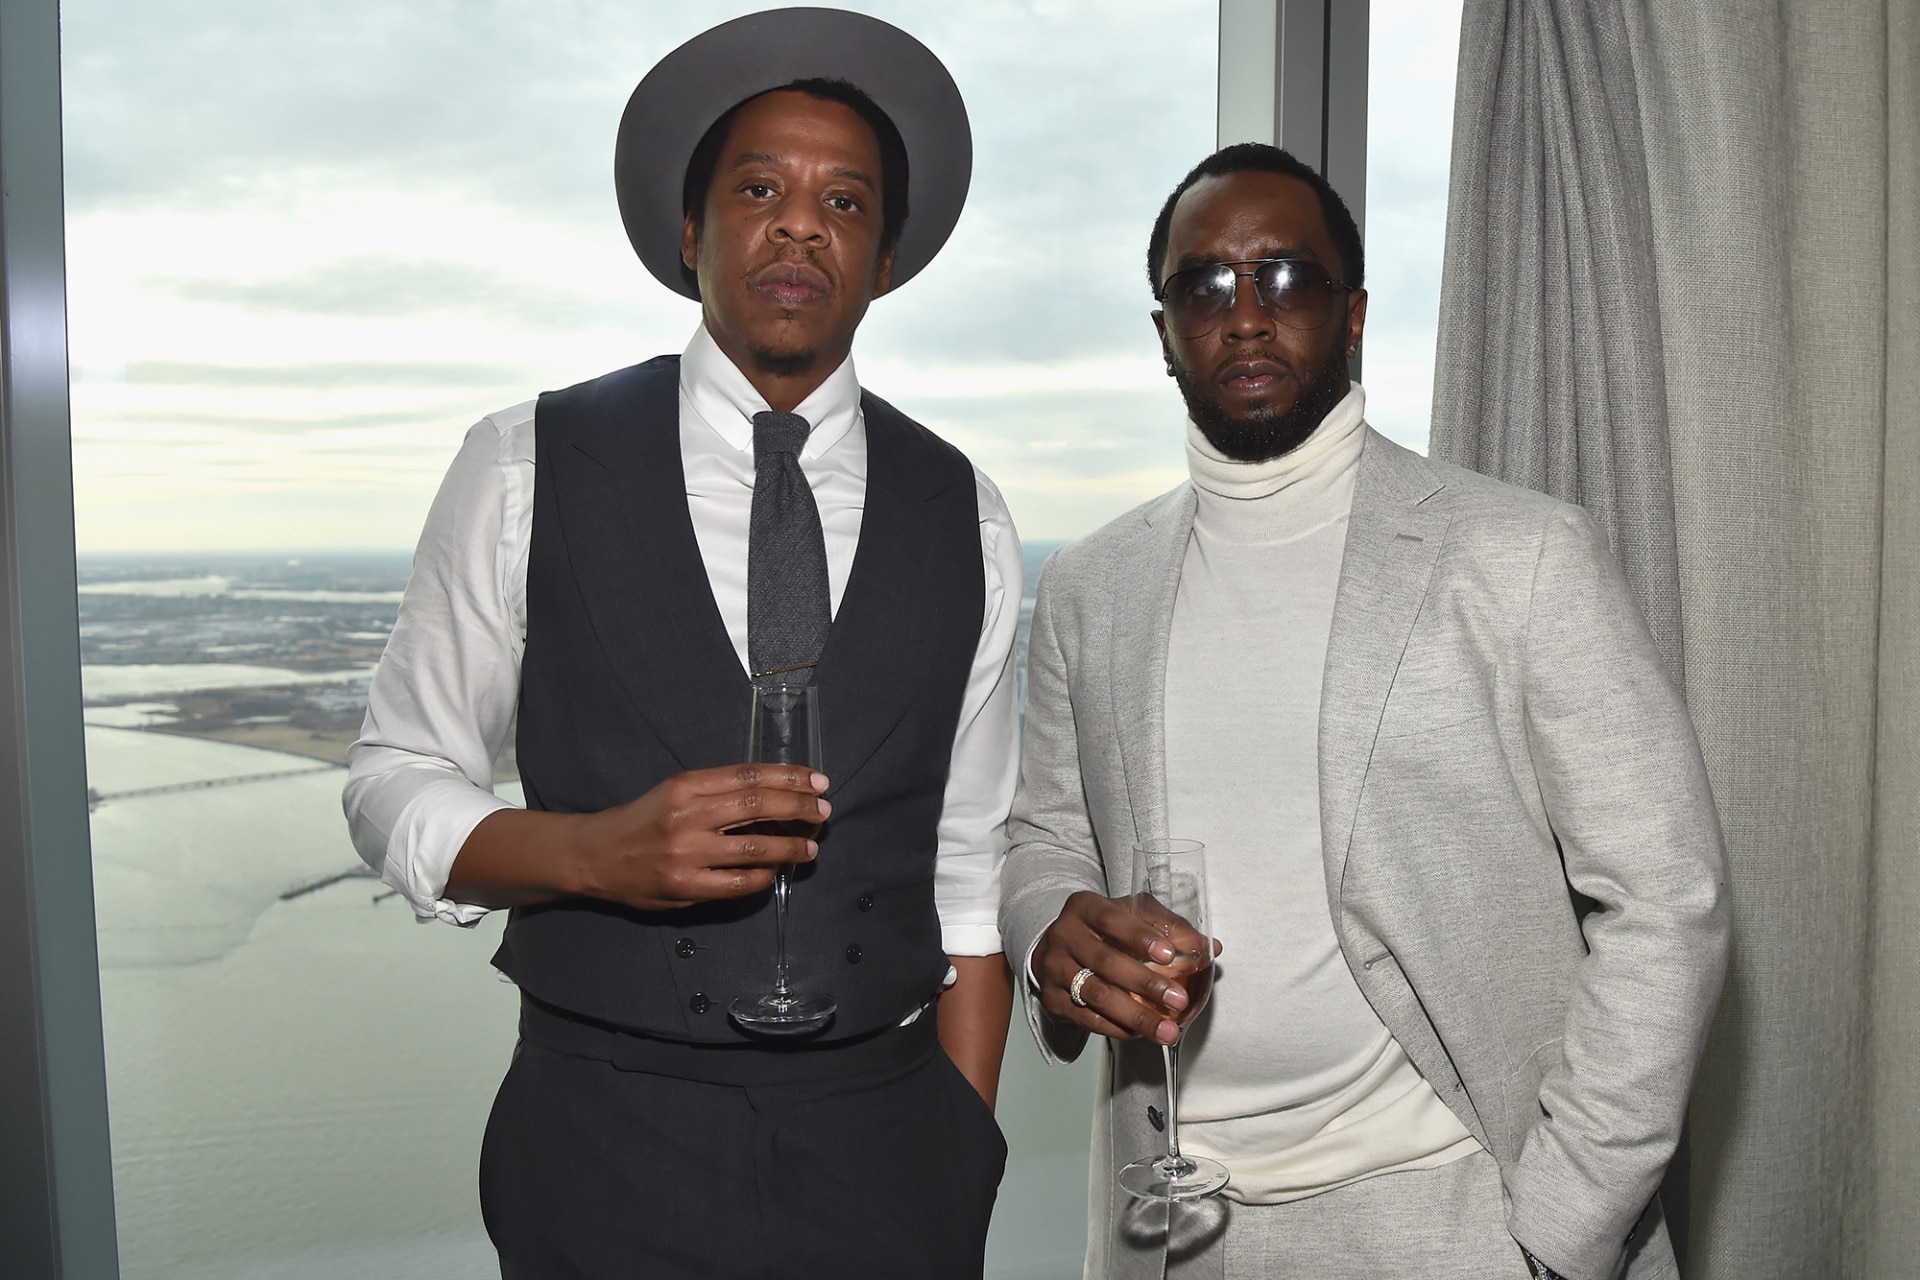 The Risks Of Jay Z's New Venture